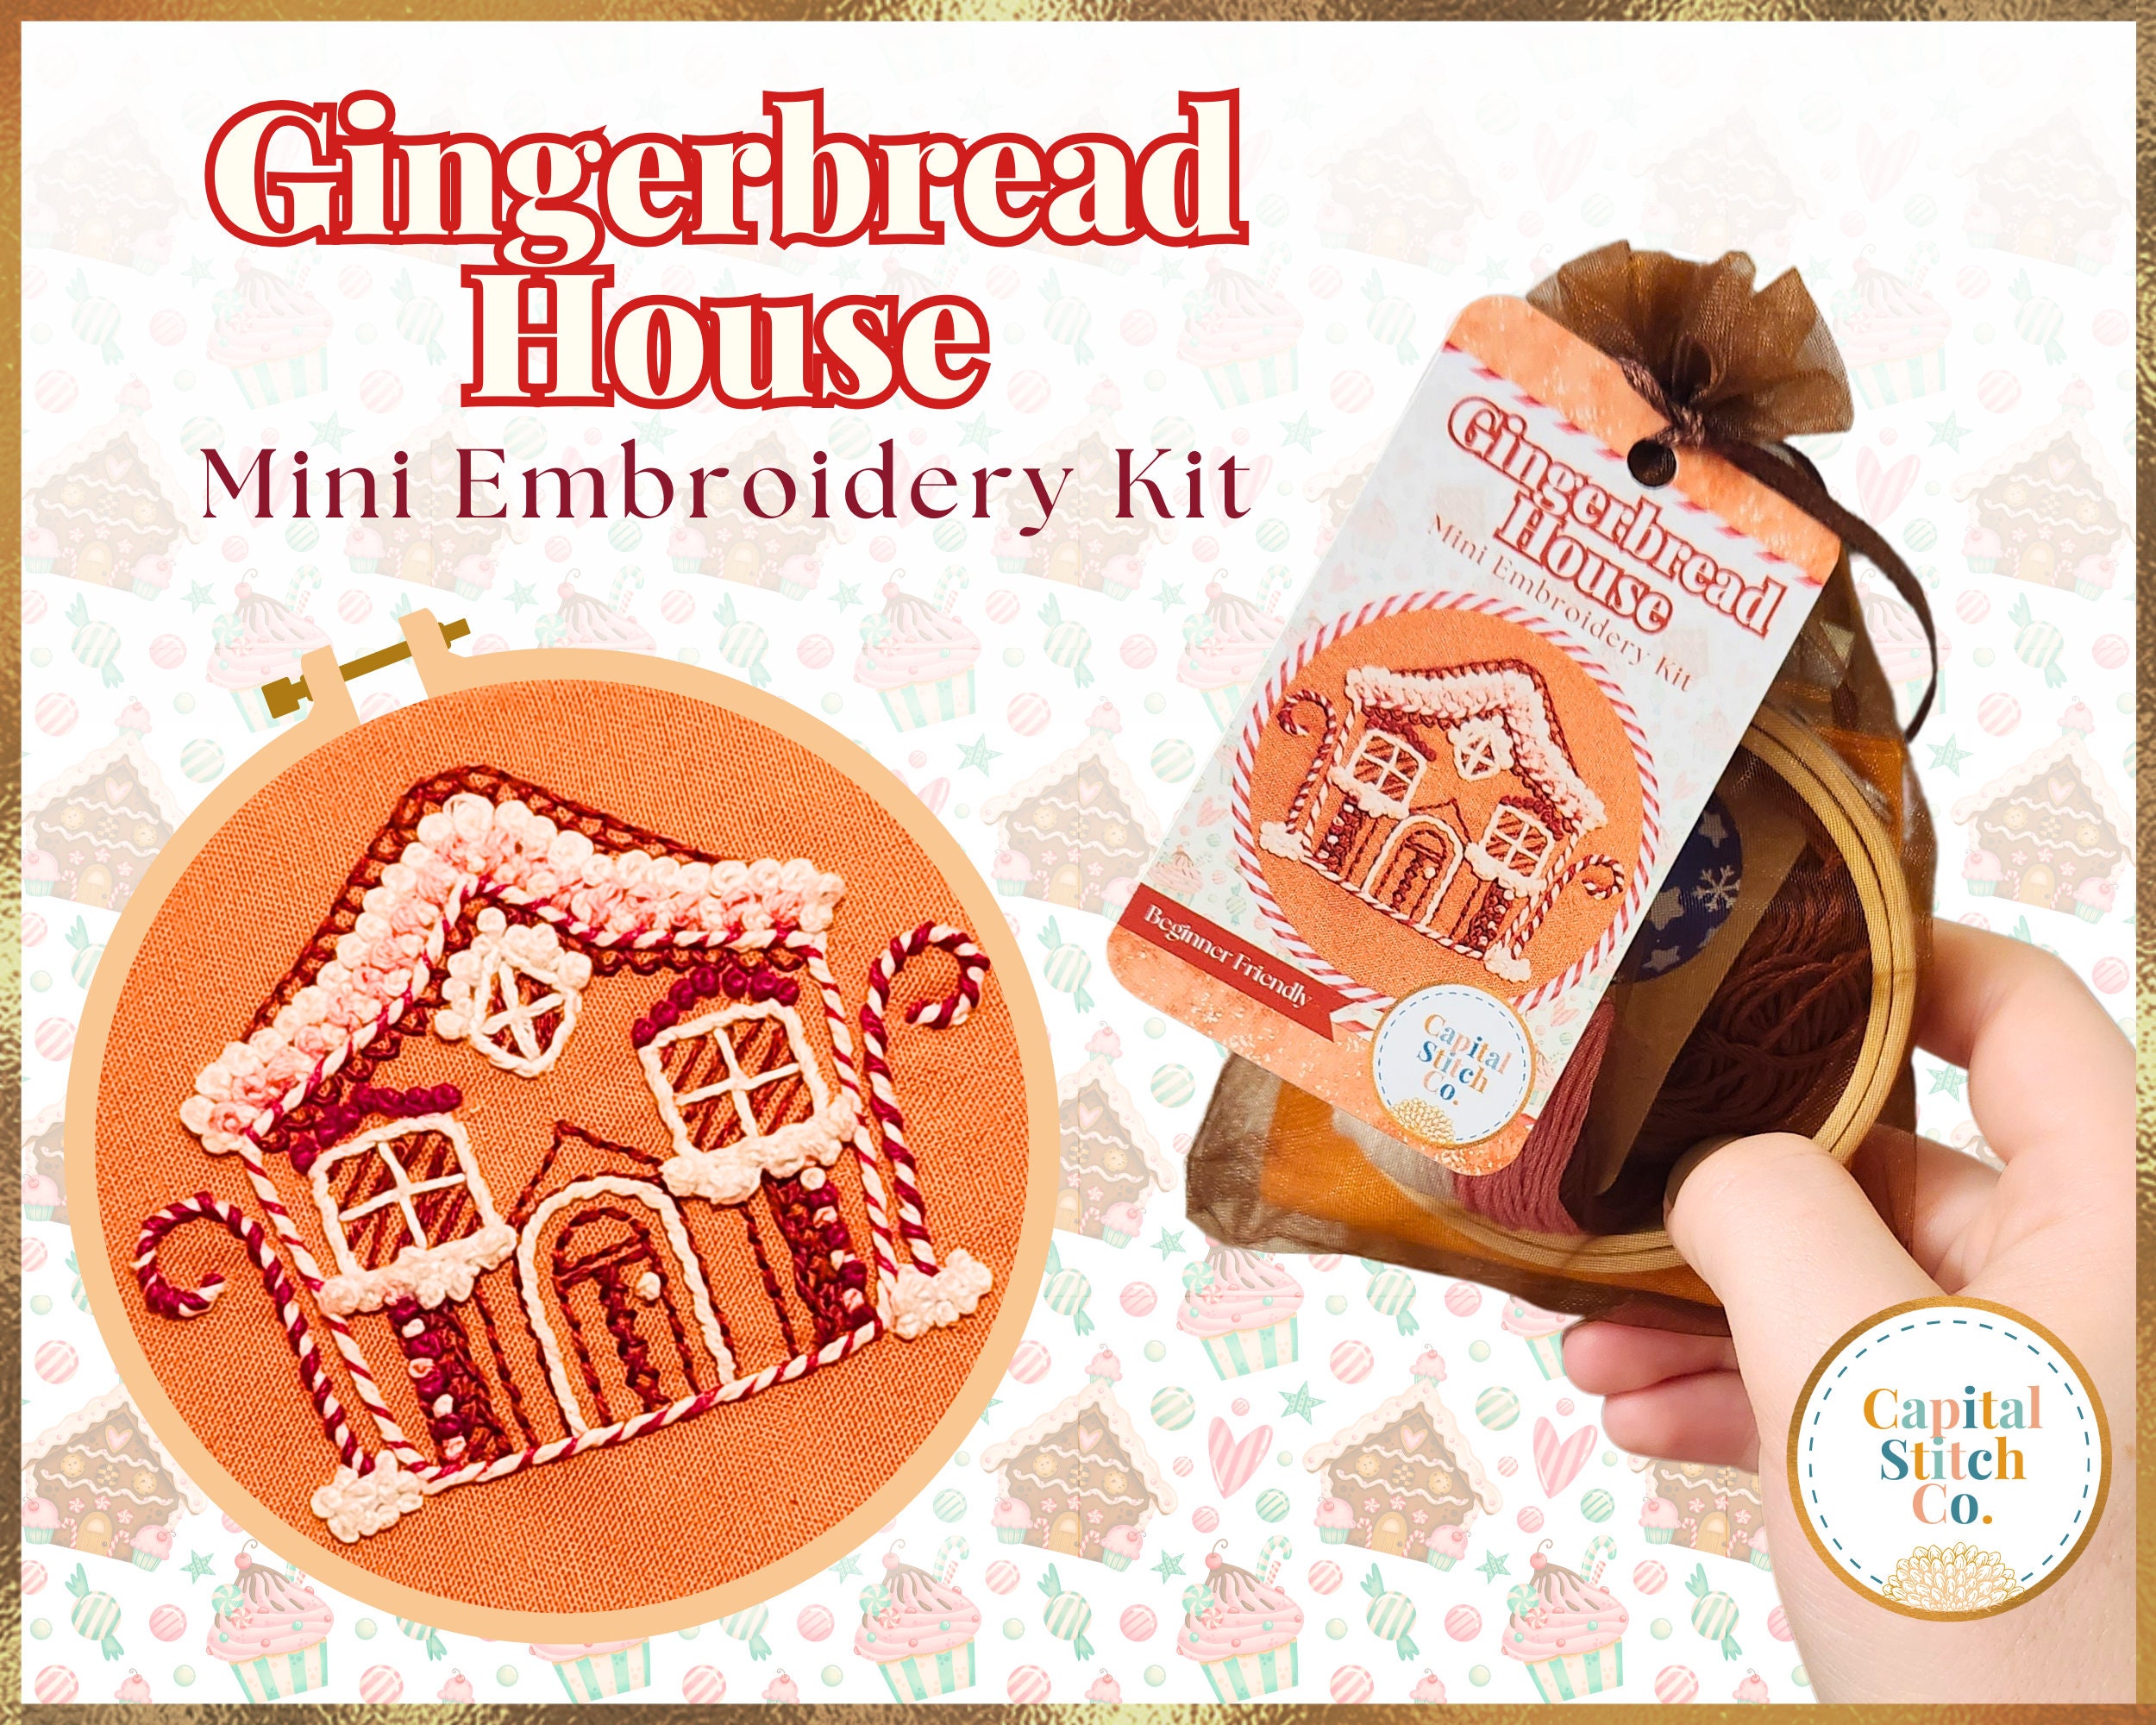 Gingerbread House DIY Mini Embroidery Kit With Tutorial Guide Do It  Yourself Handmade Ornament Christmas Gifts for Her Holiday Crafts Mom 